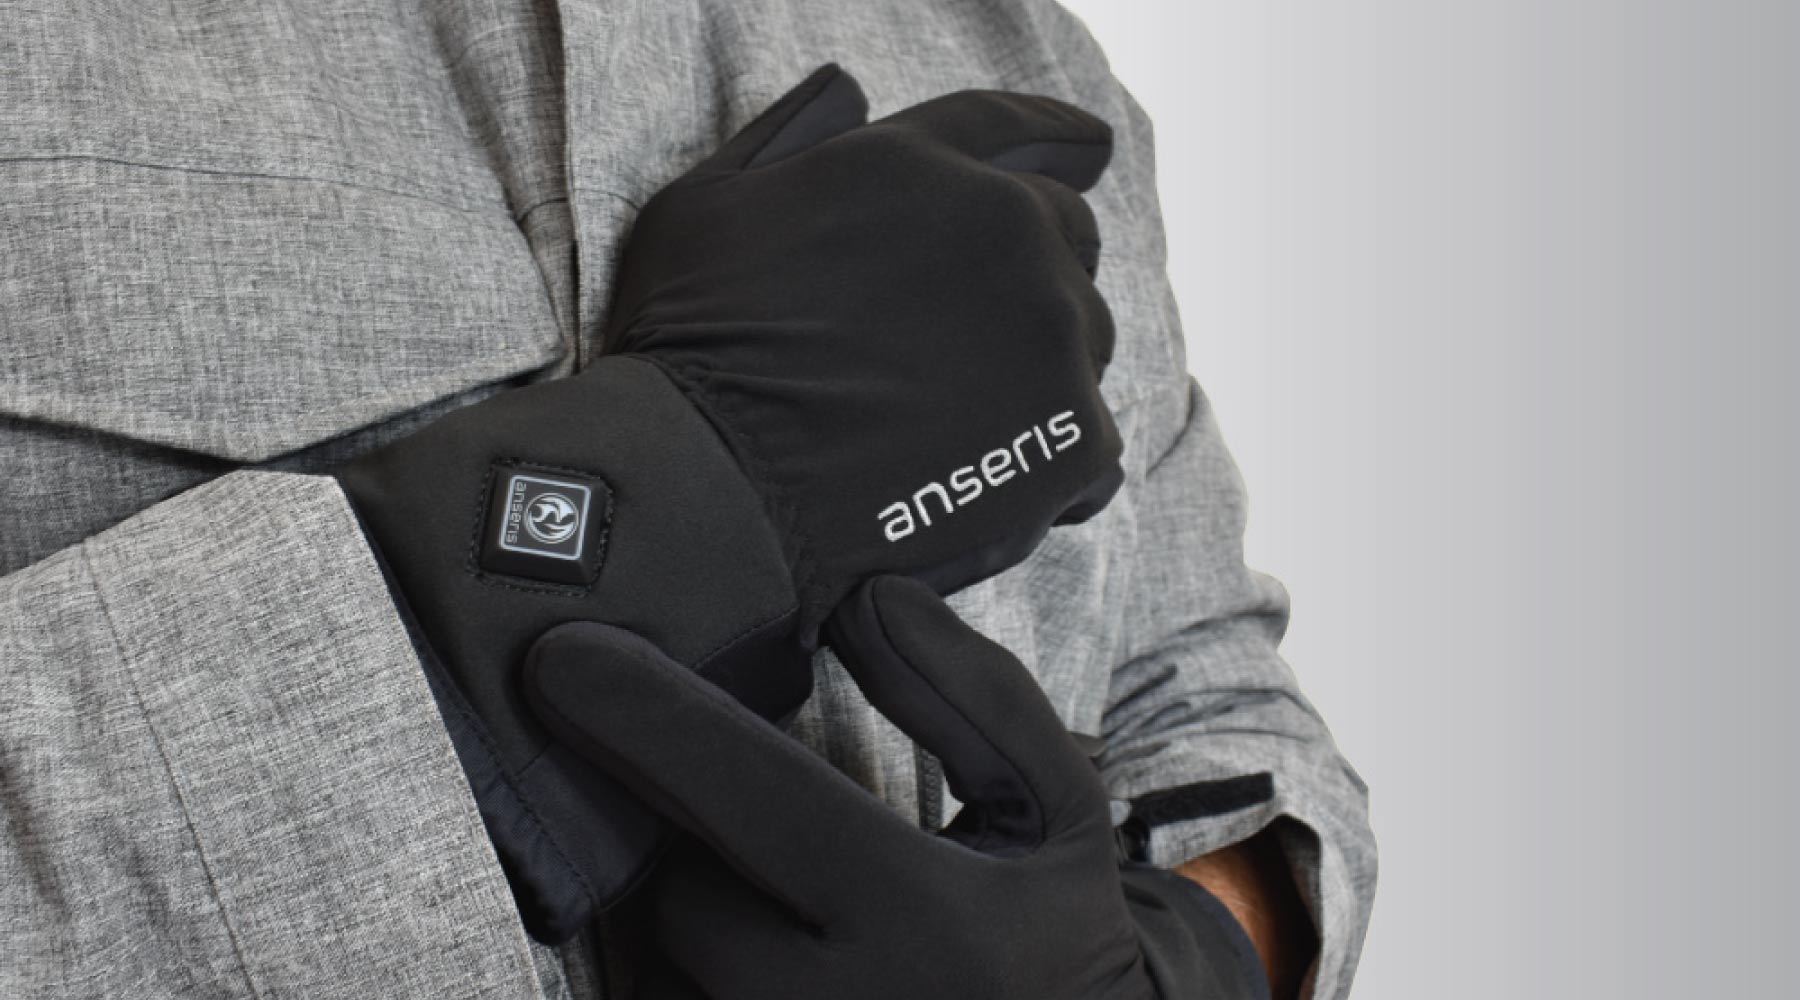 battery powered heated glove liners by anseris feature easy on and off, with adjustable temperatures and a liner style that can be worn under any other glove or mitten outer shell